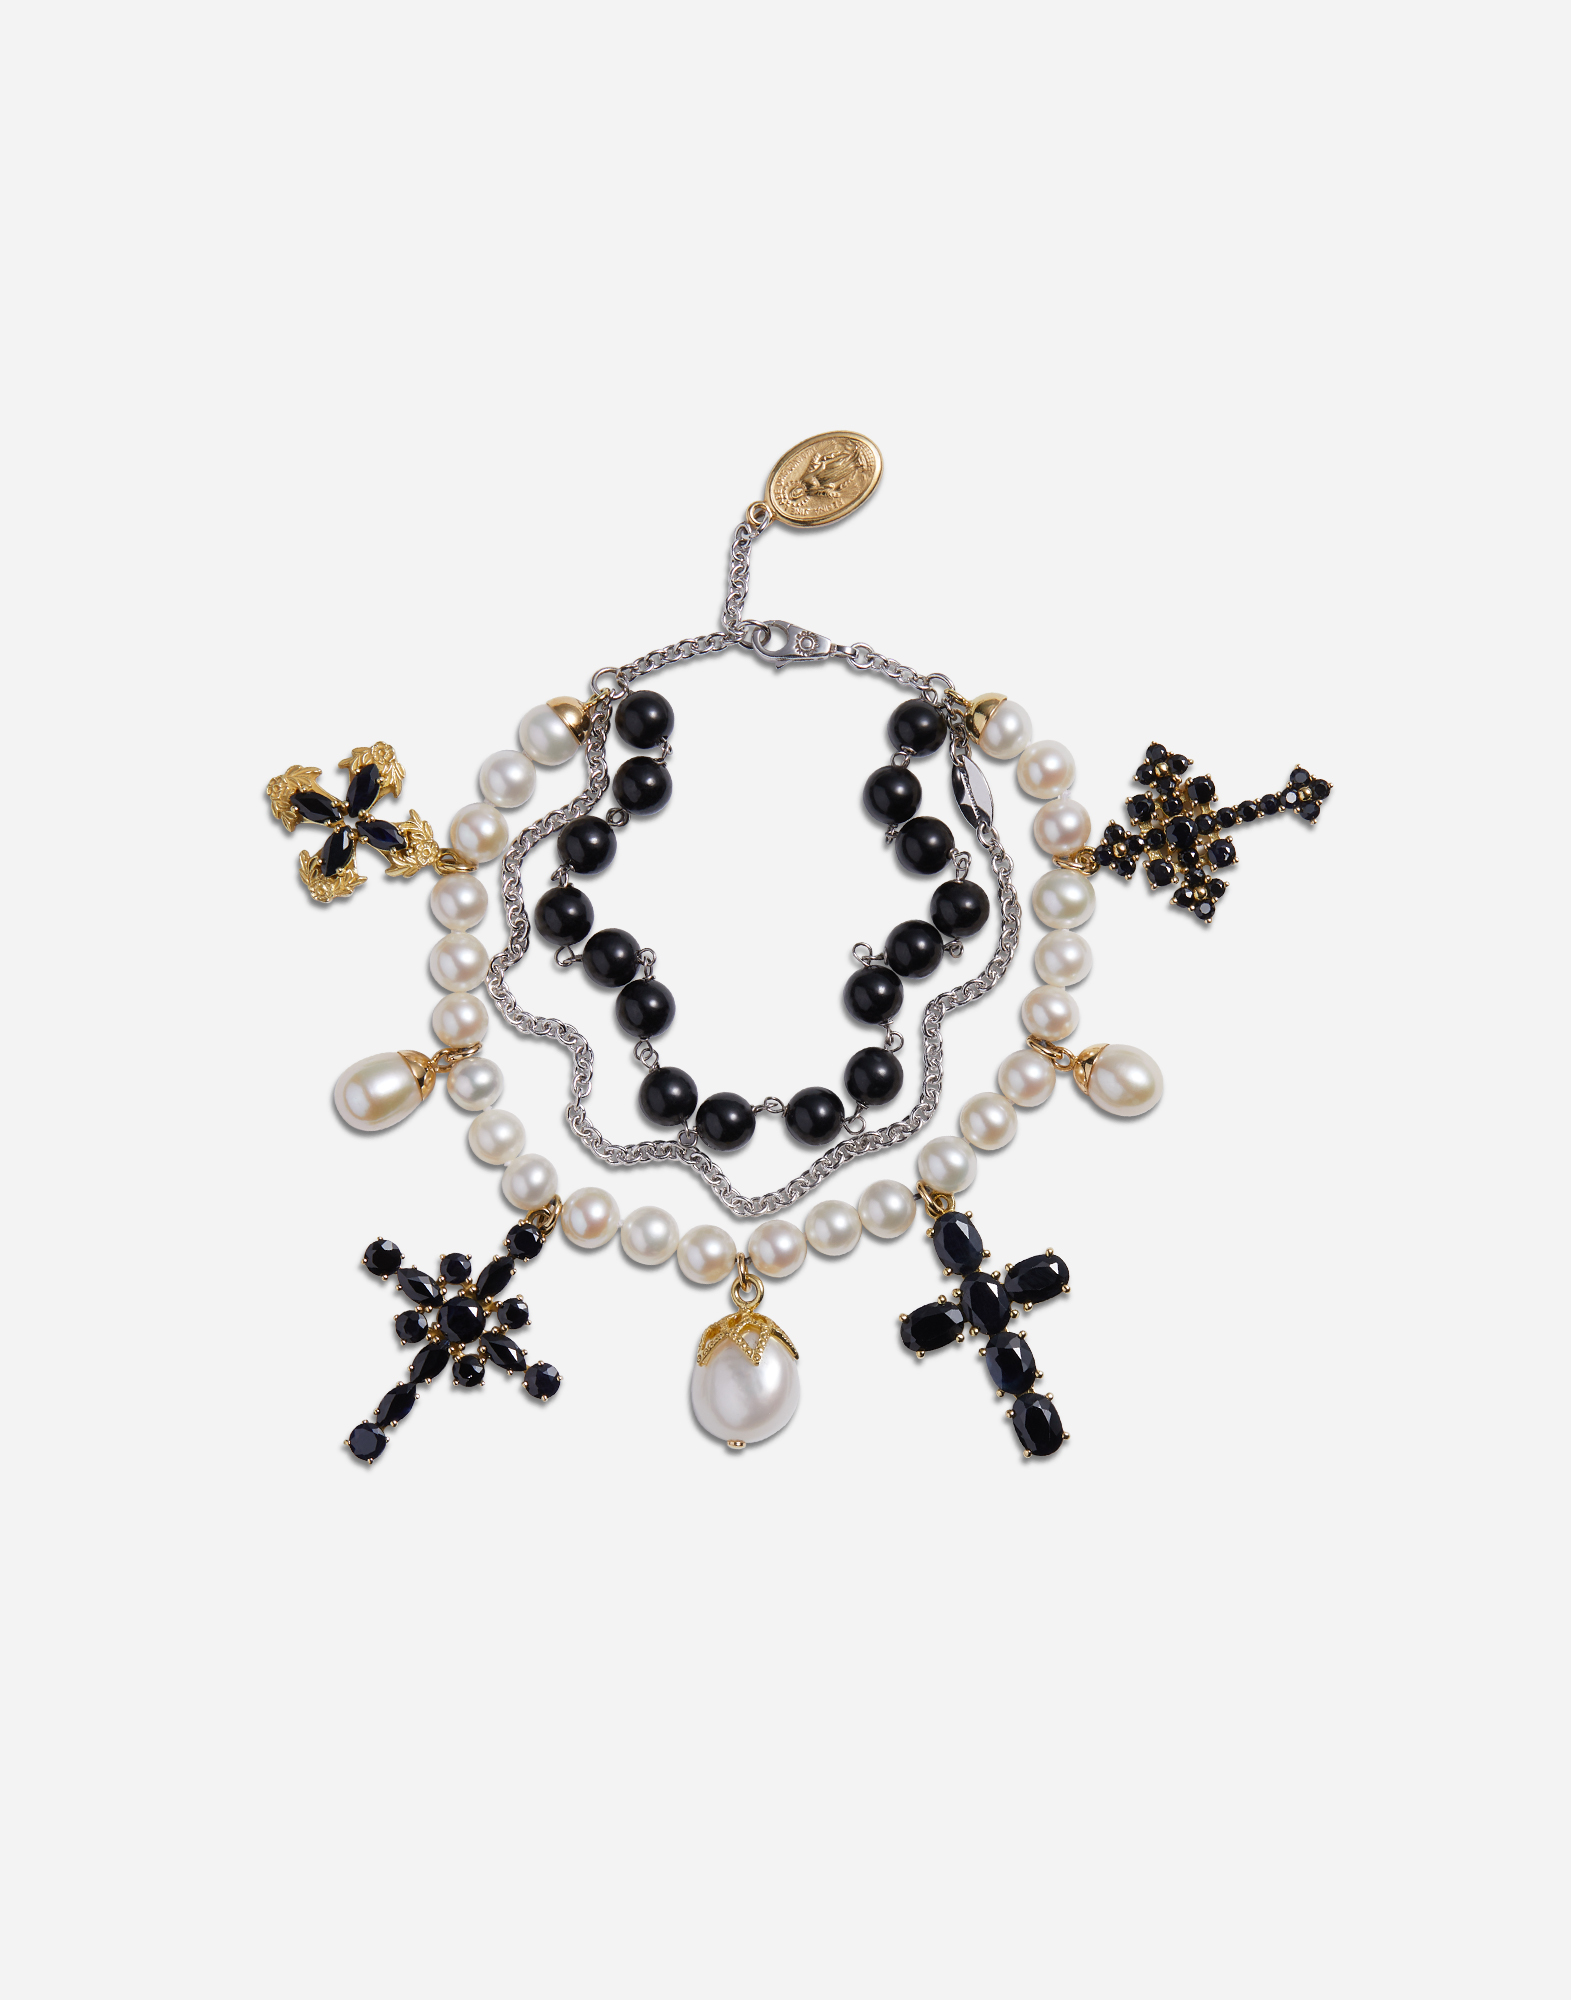 Yellow and white gold family bracelet with cblack sapphire, pearl and black jade beads in Gold